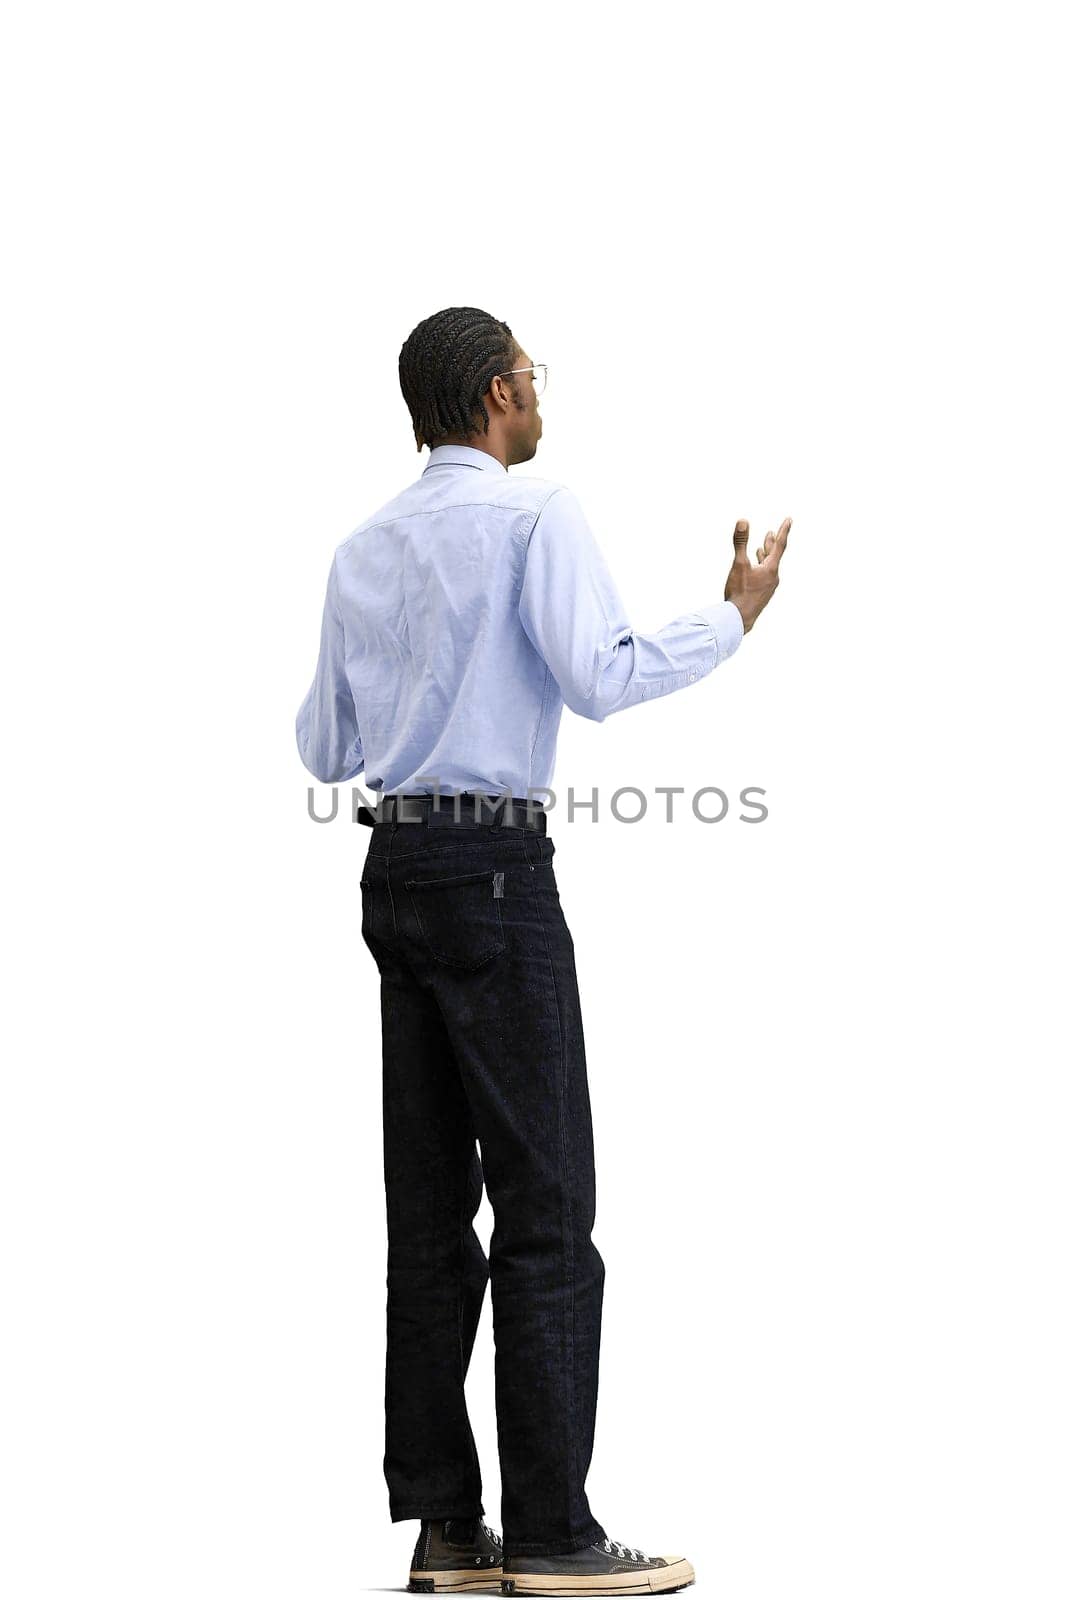 A man in a gray shirt, on a white background, full-length, look at distance by Prosto